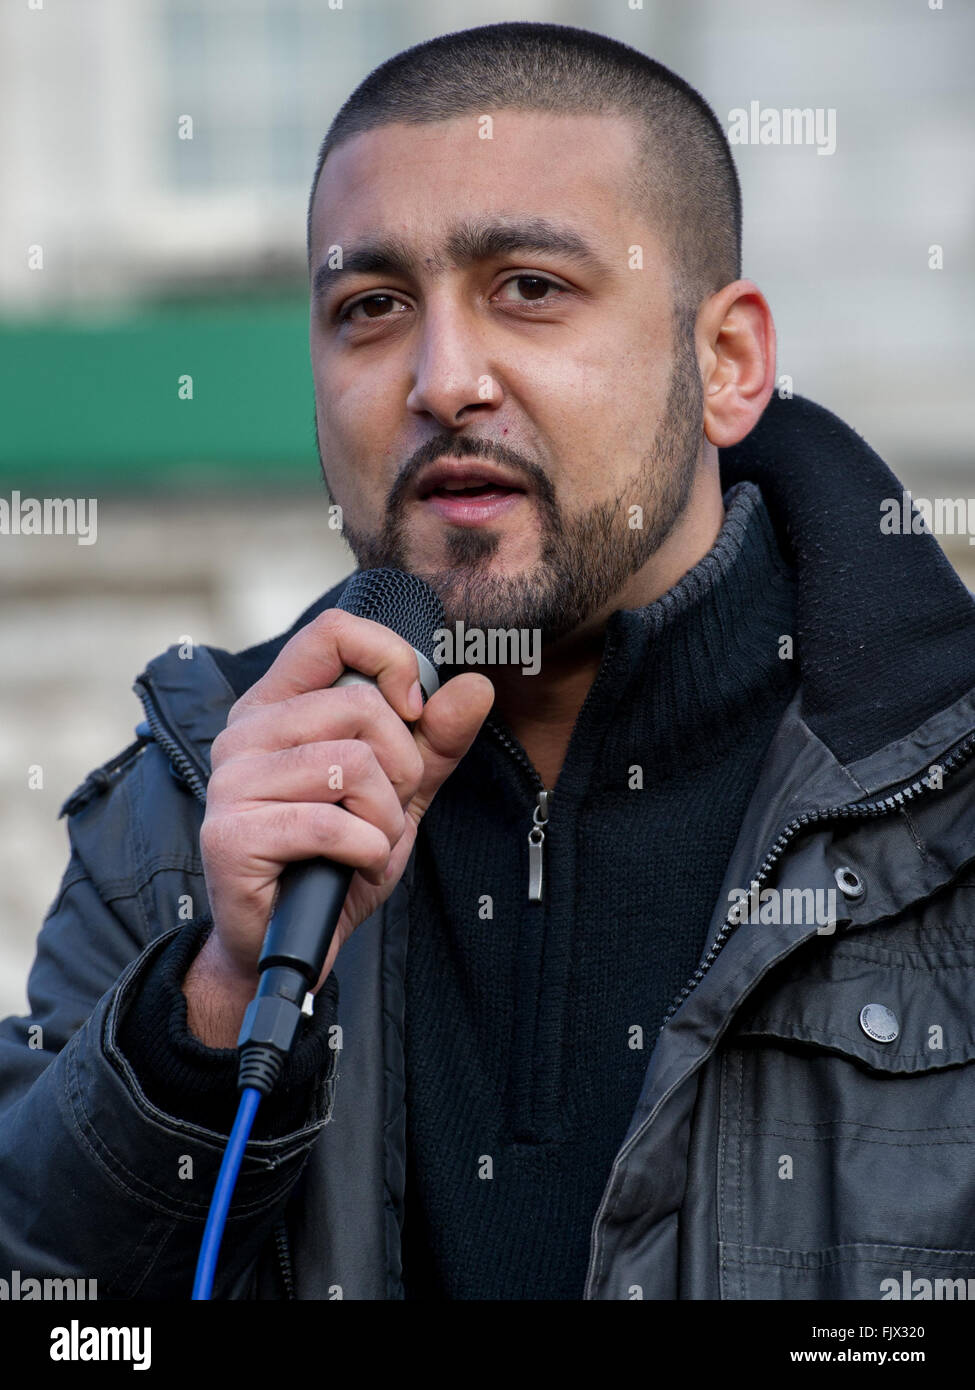 Preview. <b>Syed Bokhari</b> <b>...</b> - syed-bokhari-co-founder-of-london2calais-a-refugee-support-network-FJX320